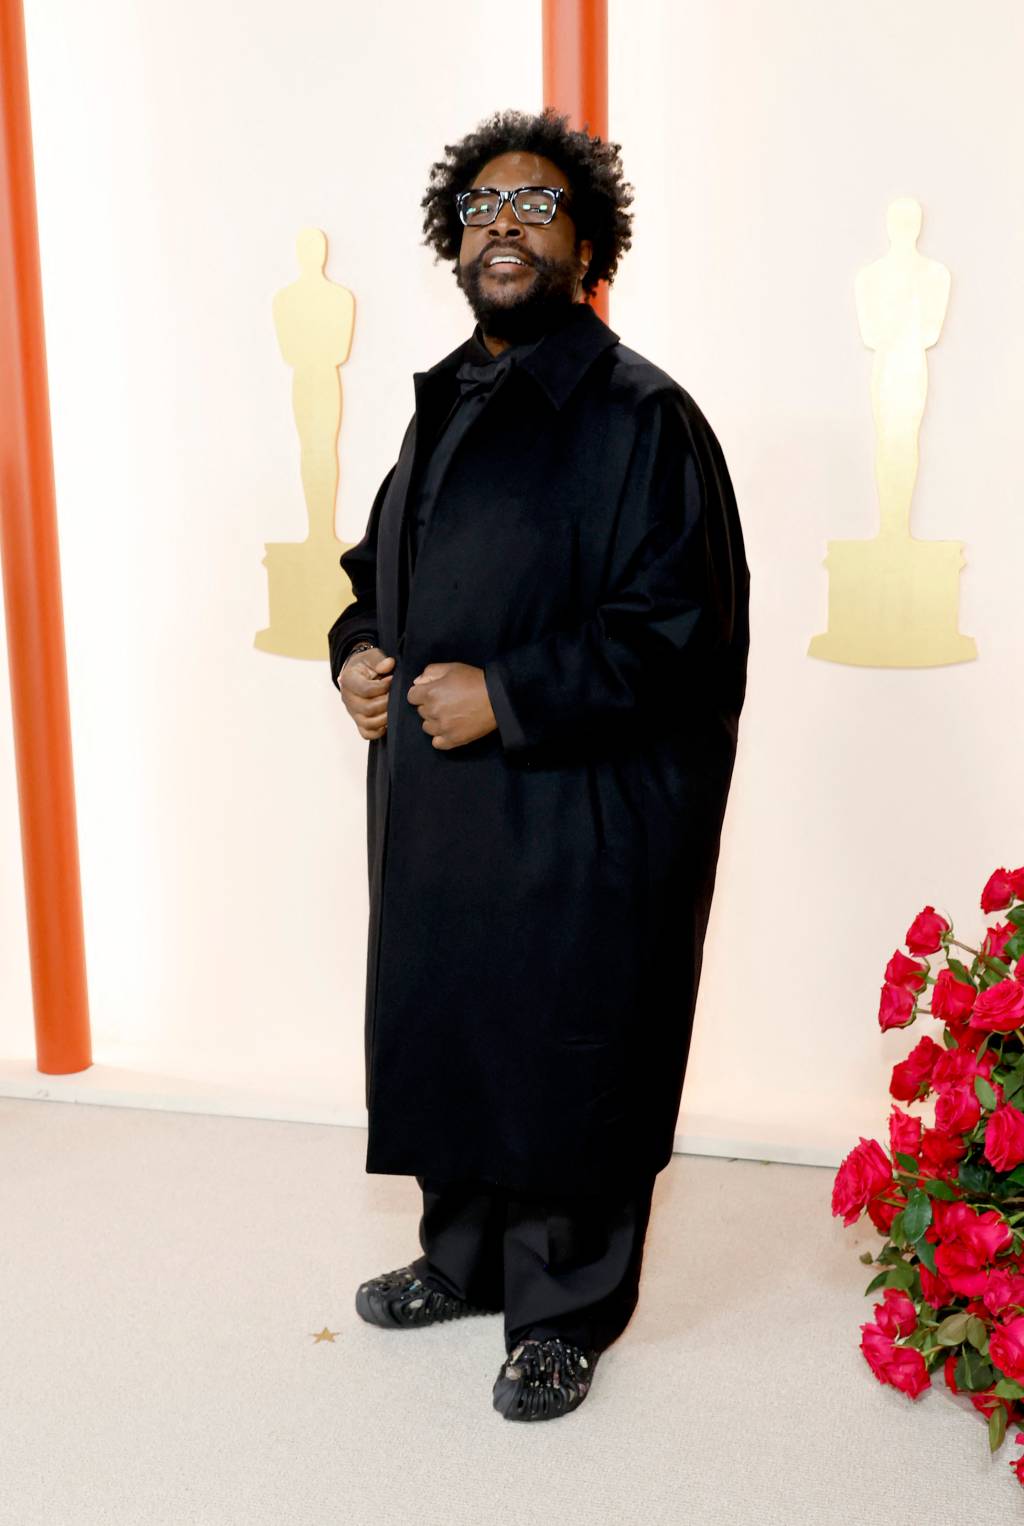 HOLLYWOOD, CALIFORNIA - MARCH 12: Questlove attends the 95th Annual Academy Awards on March 12, 2023 in Hollywood, California. Mike Coppola/Getty Images/AFP (Photo by Mike Coppola / GETTY IMAGES NORTH AMERICA / Getty Images via AFP)